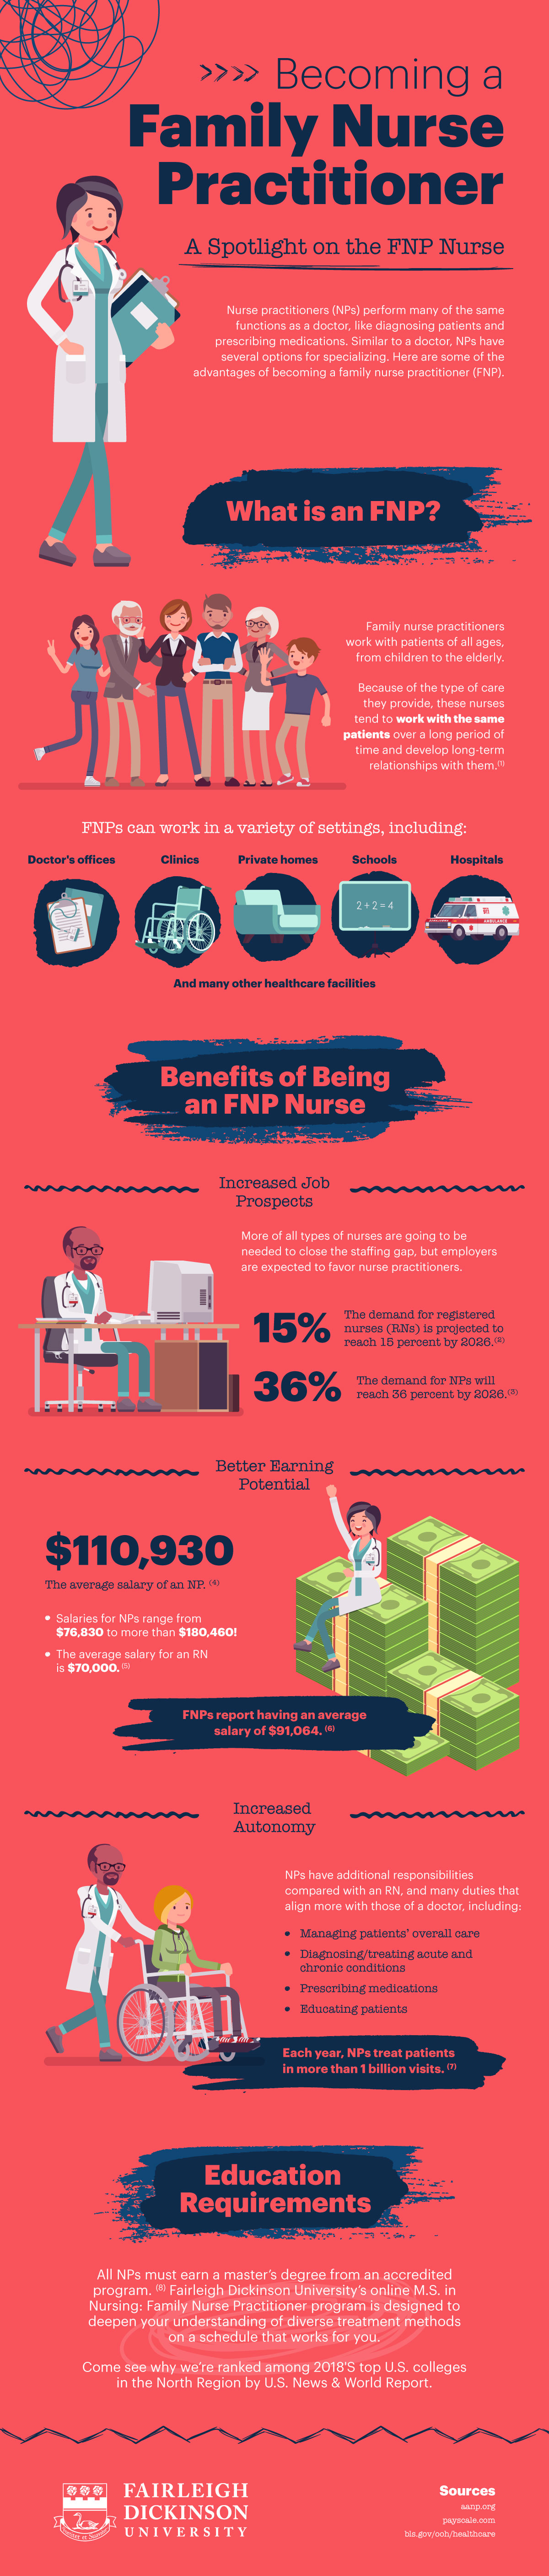 Illustrated infographic about Family Nurse Practitioners with statistics.